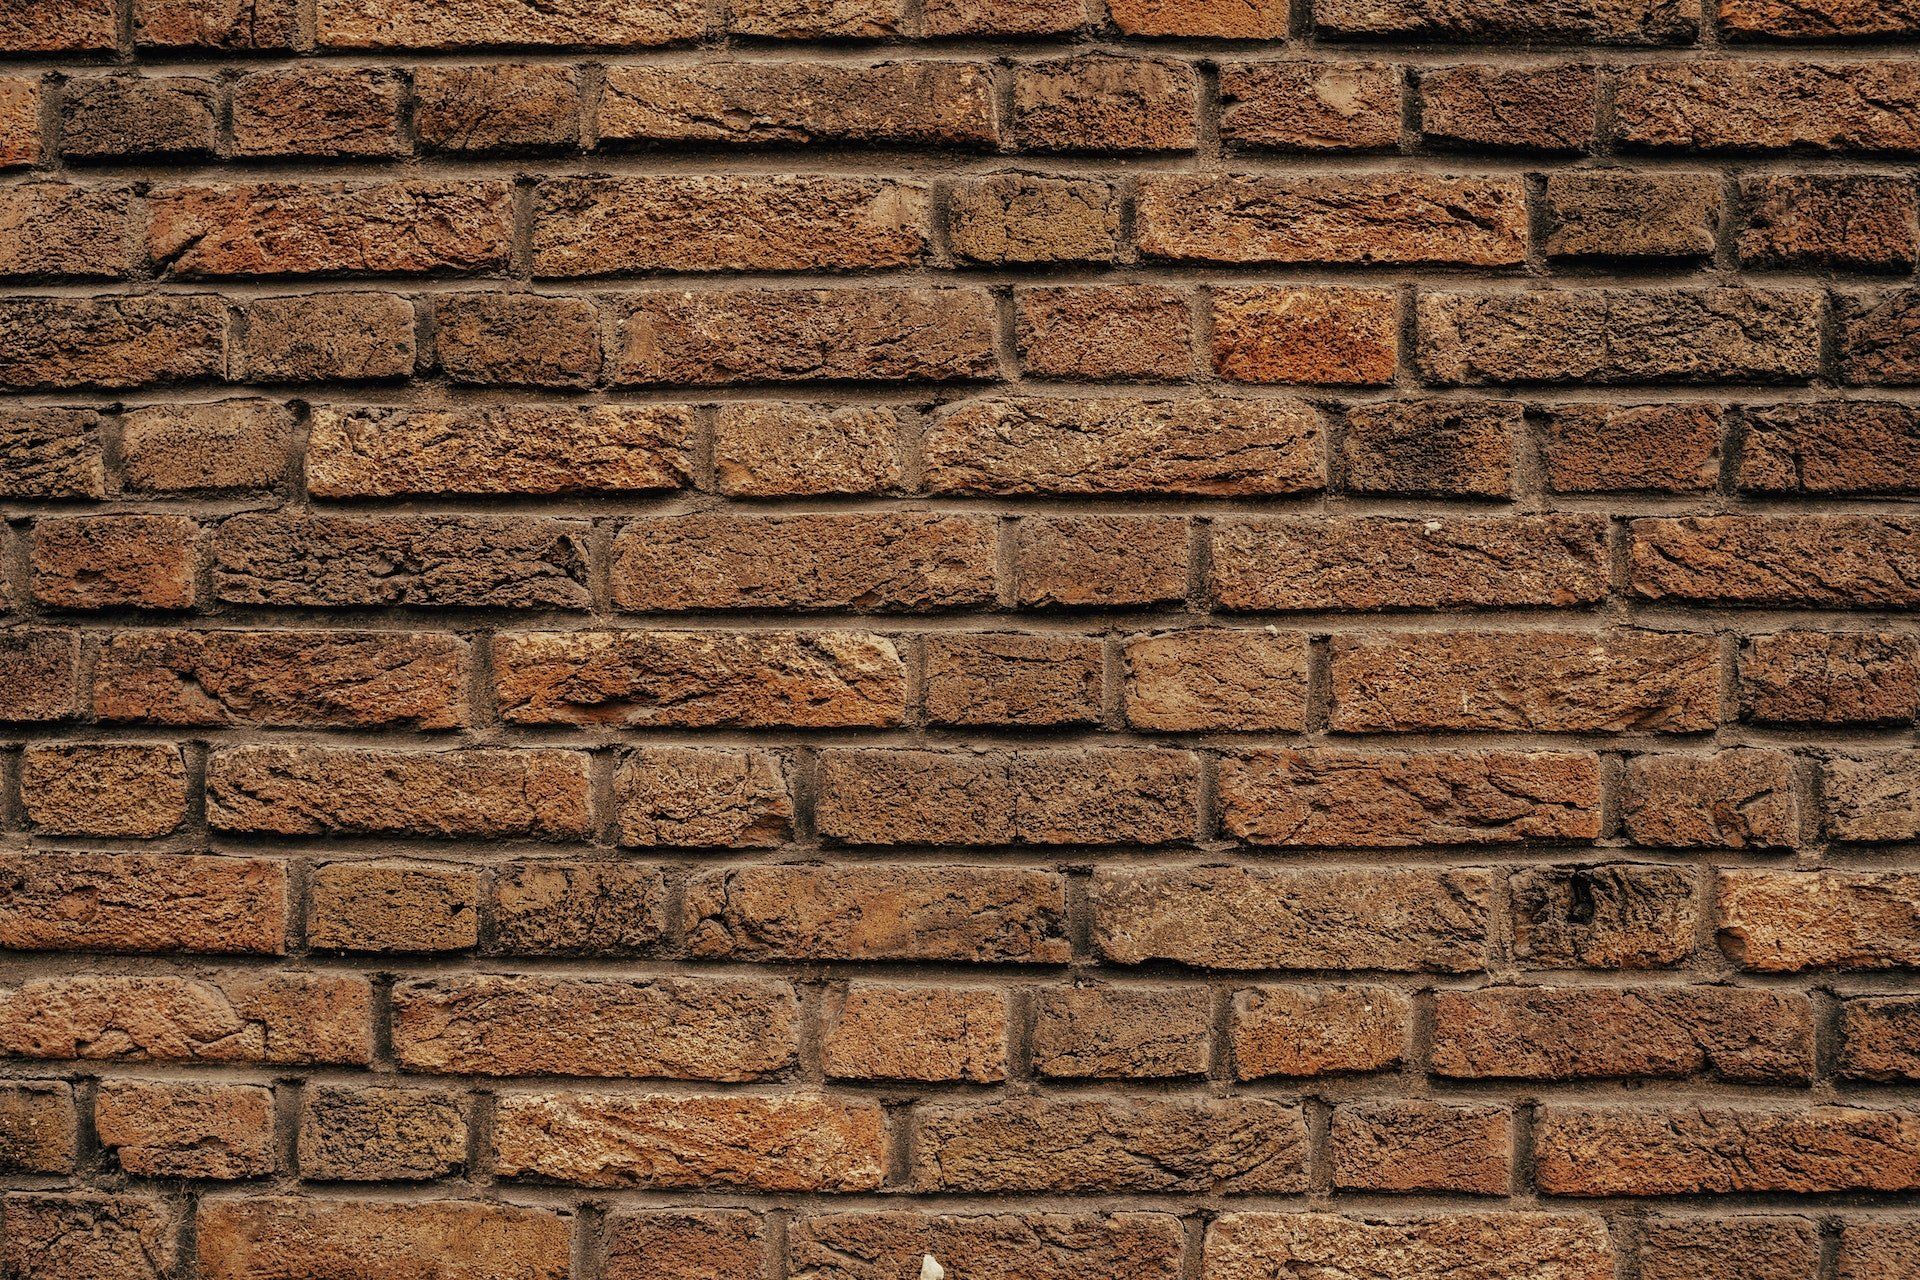 How to light a brick wall